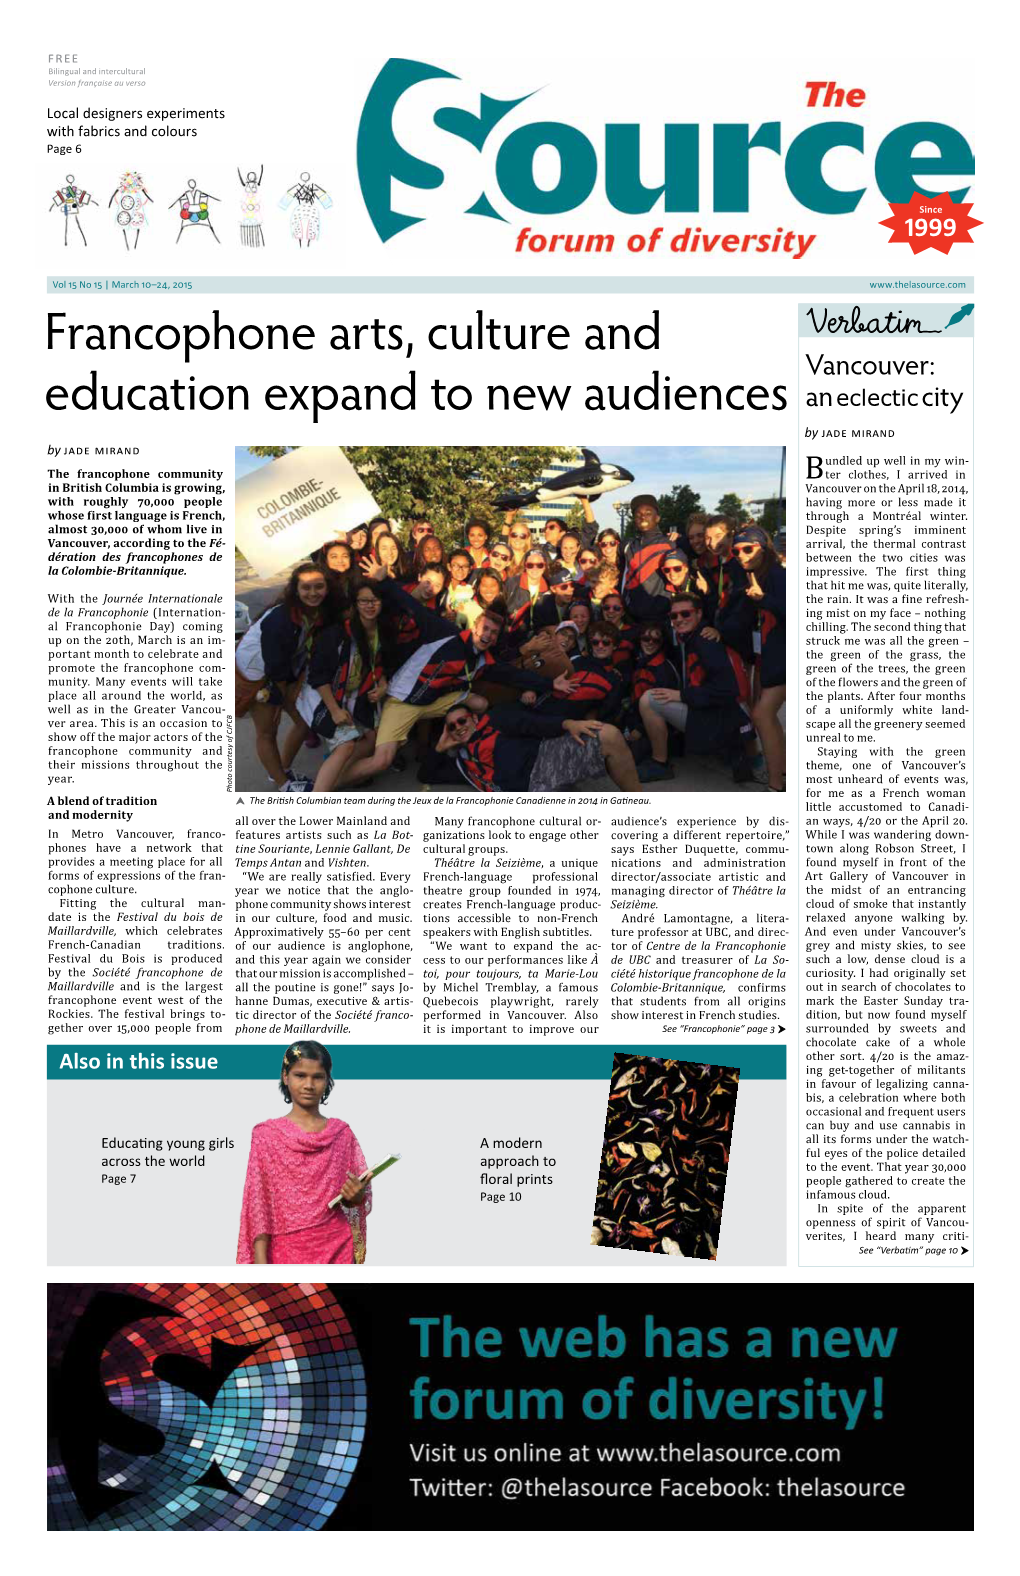 Francophone Arts, Culture and Education Expand to New Audiences